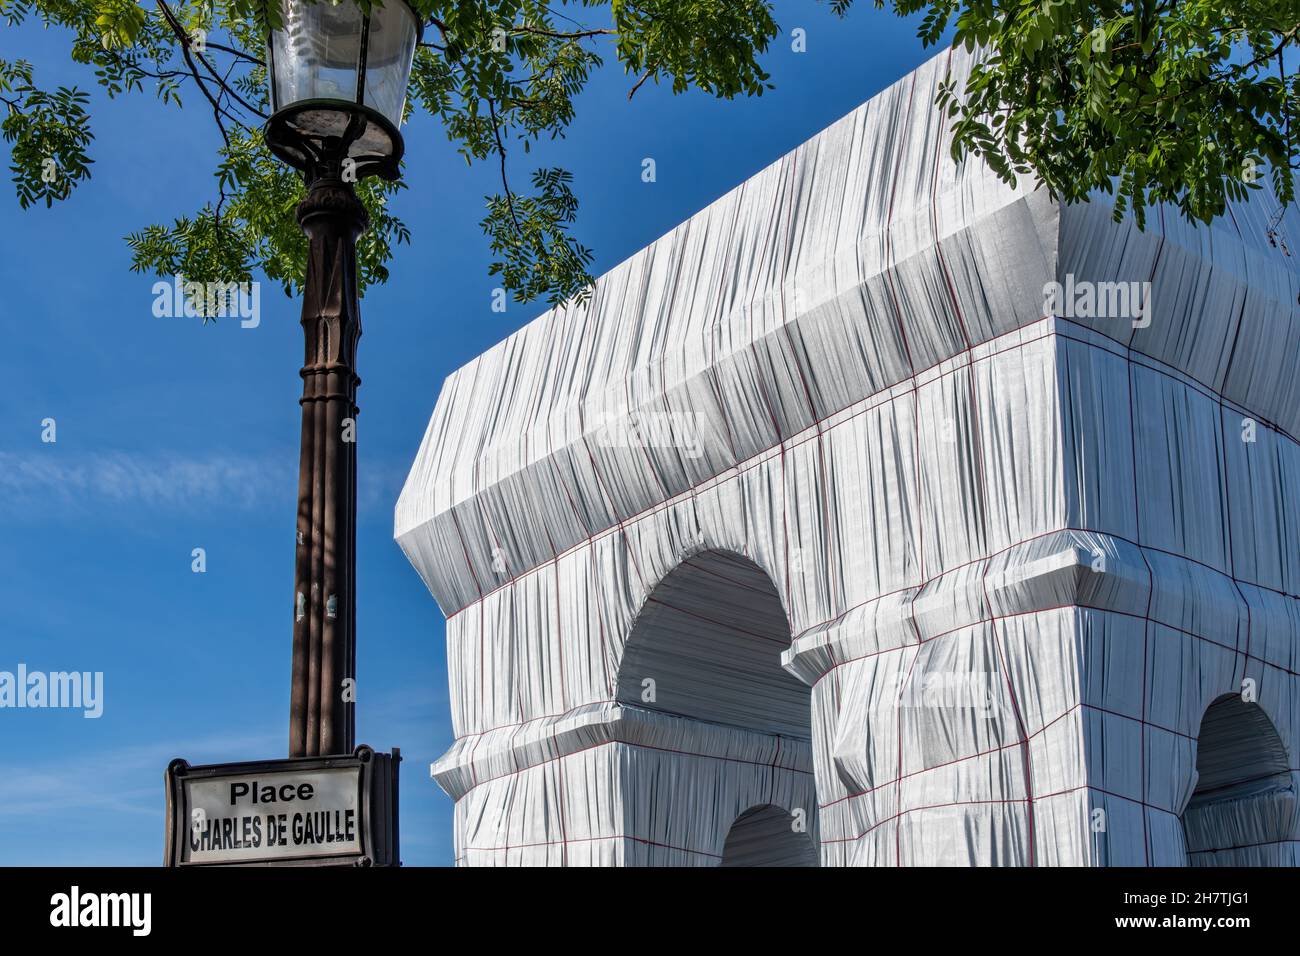 Paris, France-September 2021; Low angle partial view of wrapped Arc de Triomphe art installation by Christo with street lantern with street sign (Plac Stock Photo